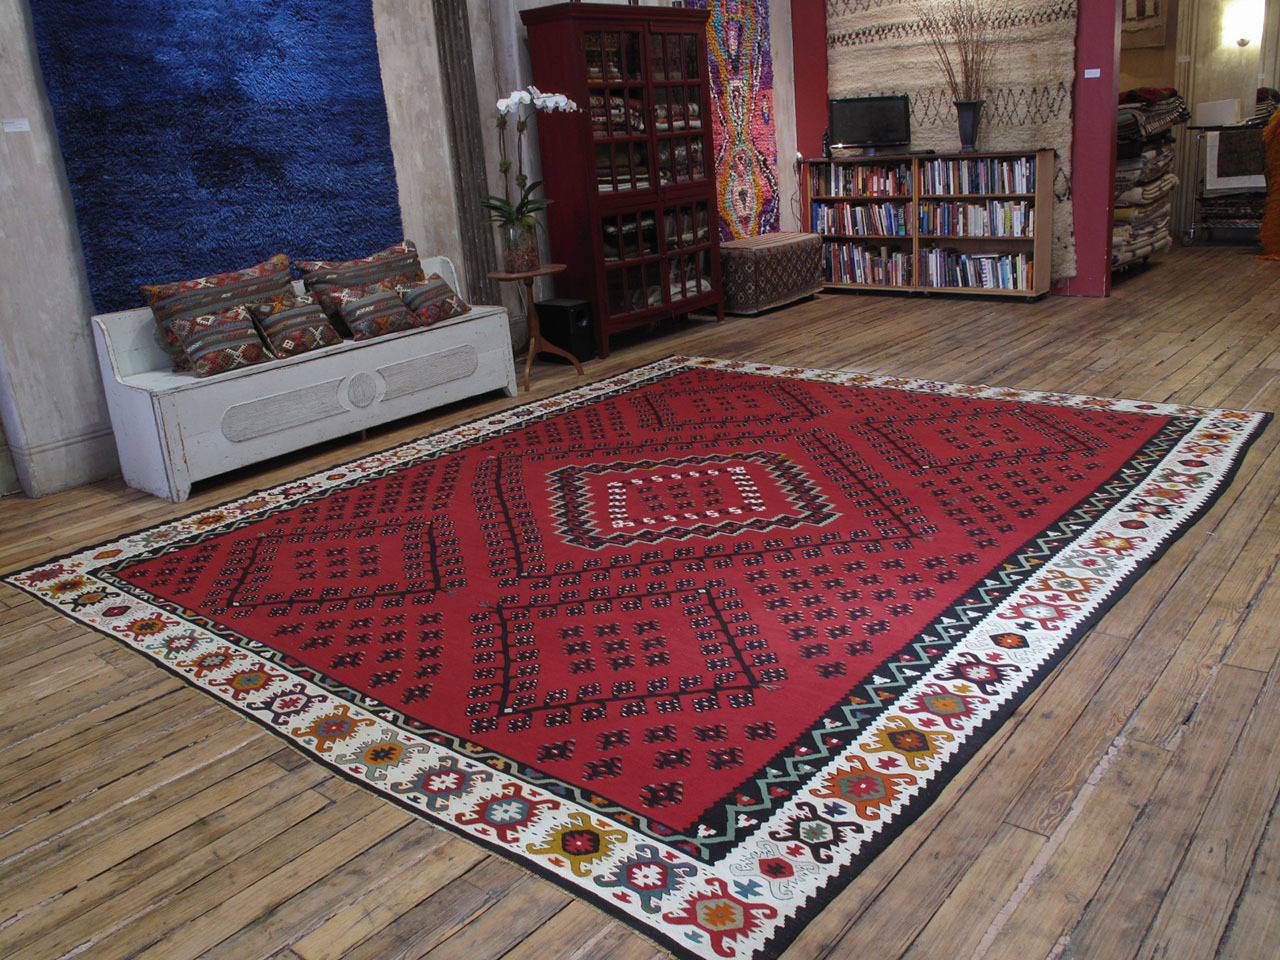 A beautiful old Kilim of large proportions from the border region between Serbia and Bulgaria, which has a centuries-old tradition of Kilim weaving - older examples from the region are called Sharkoy, the old Turkish name of the town of Pirot, the